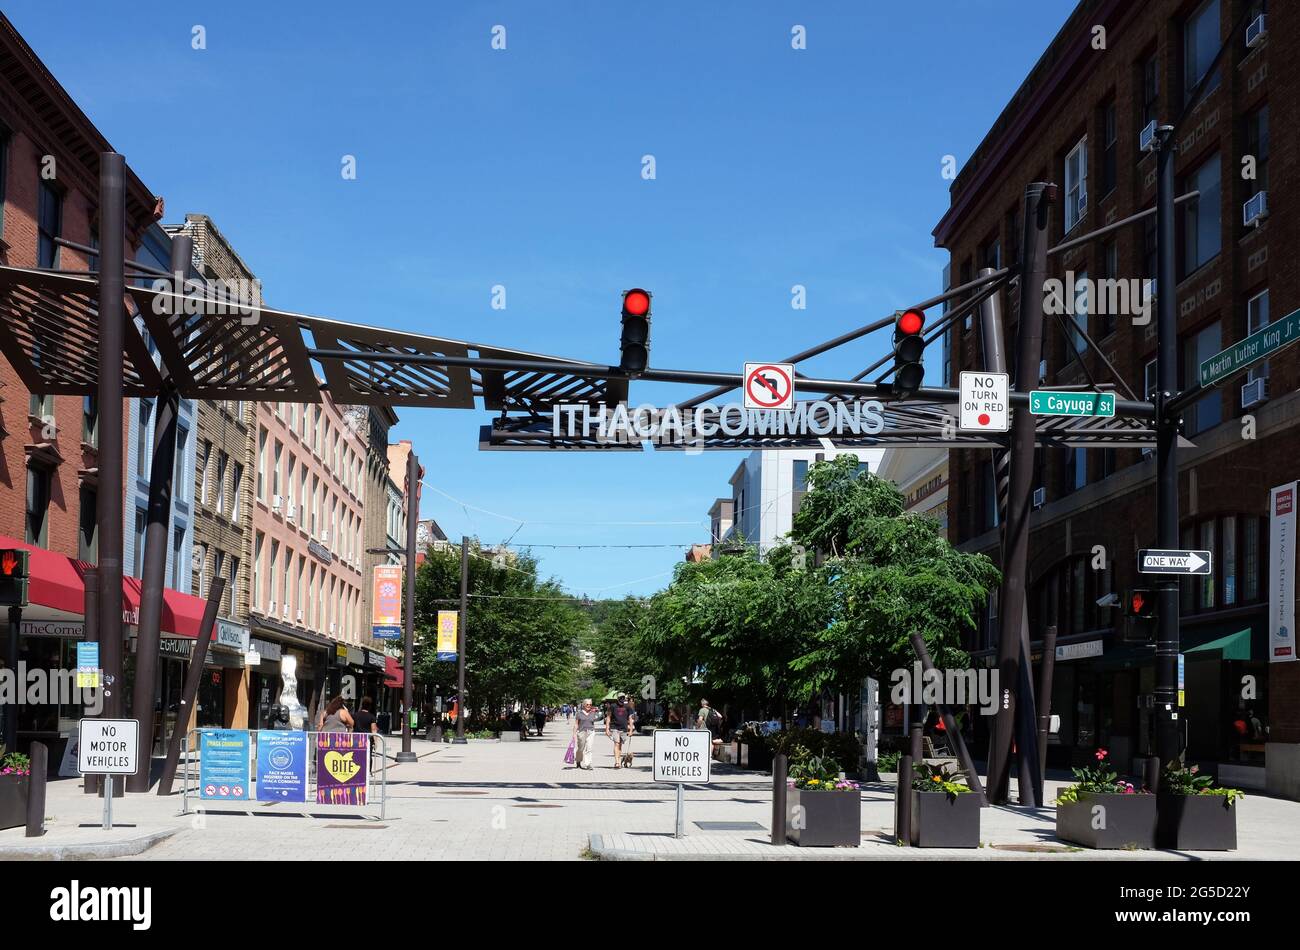 ITHACA, NEW YORK - 17 JUNE 2021: Ithaca Commons, a two-block pedestrian mall in the business improvement district known as Downtown Ithaca. Stock Photo